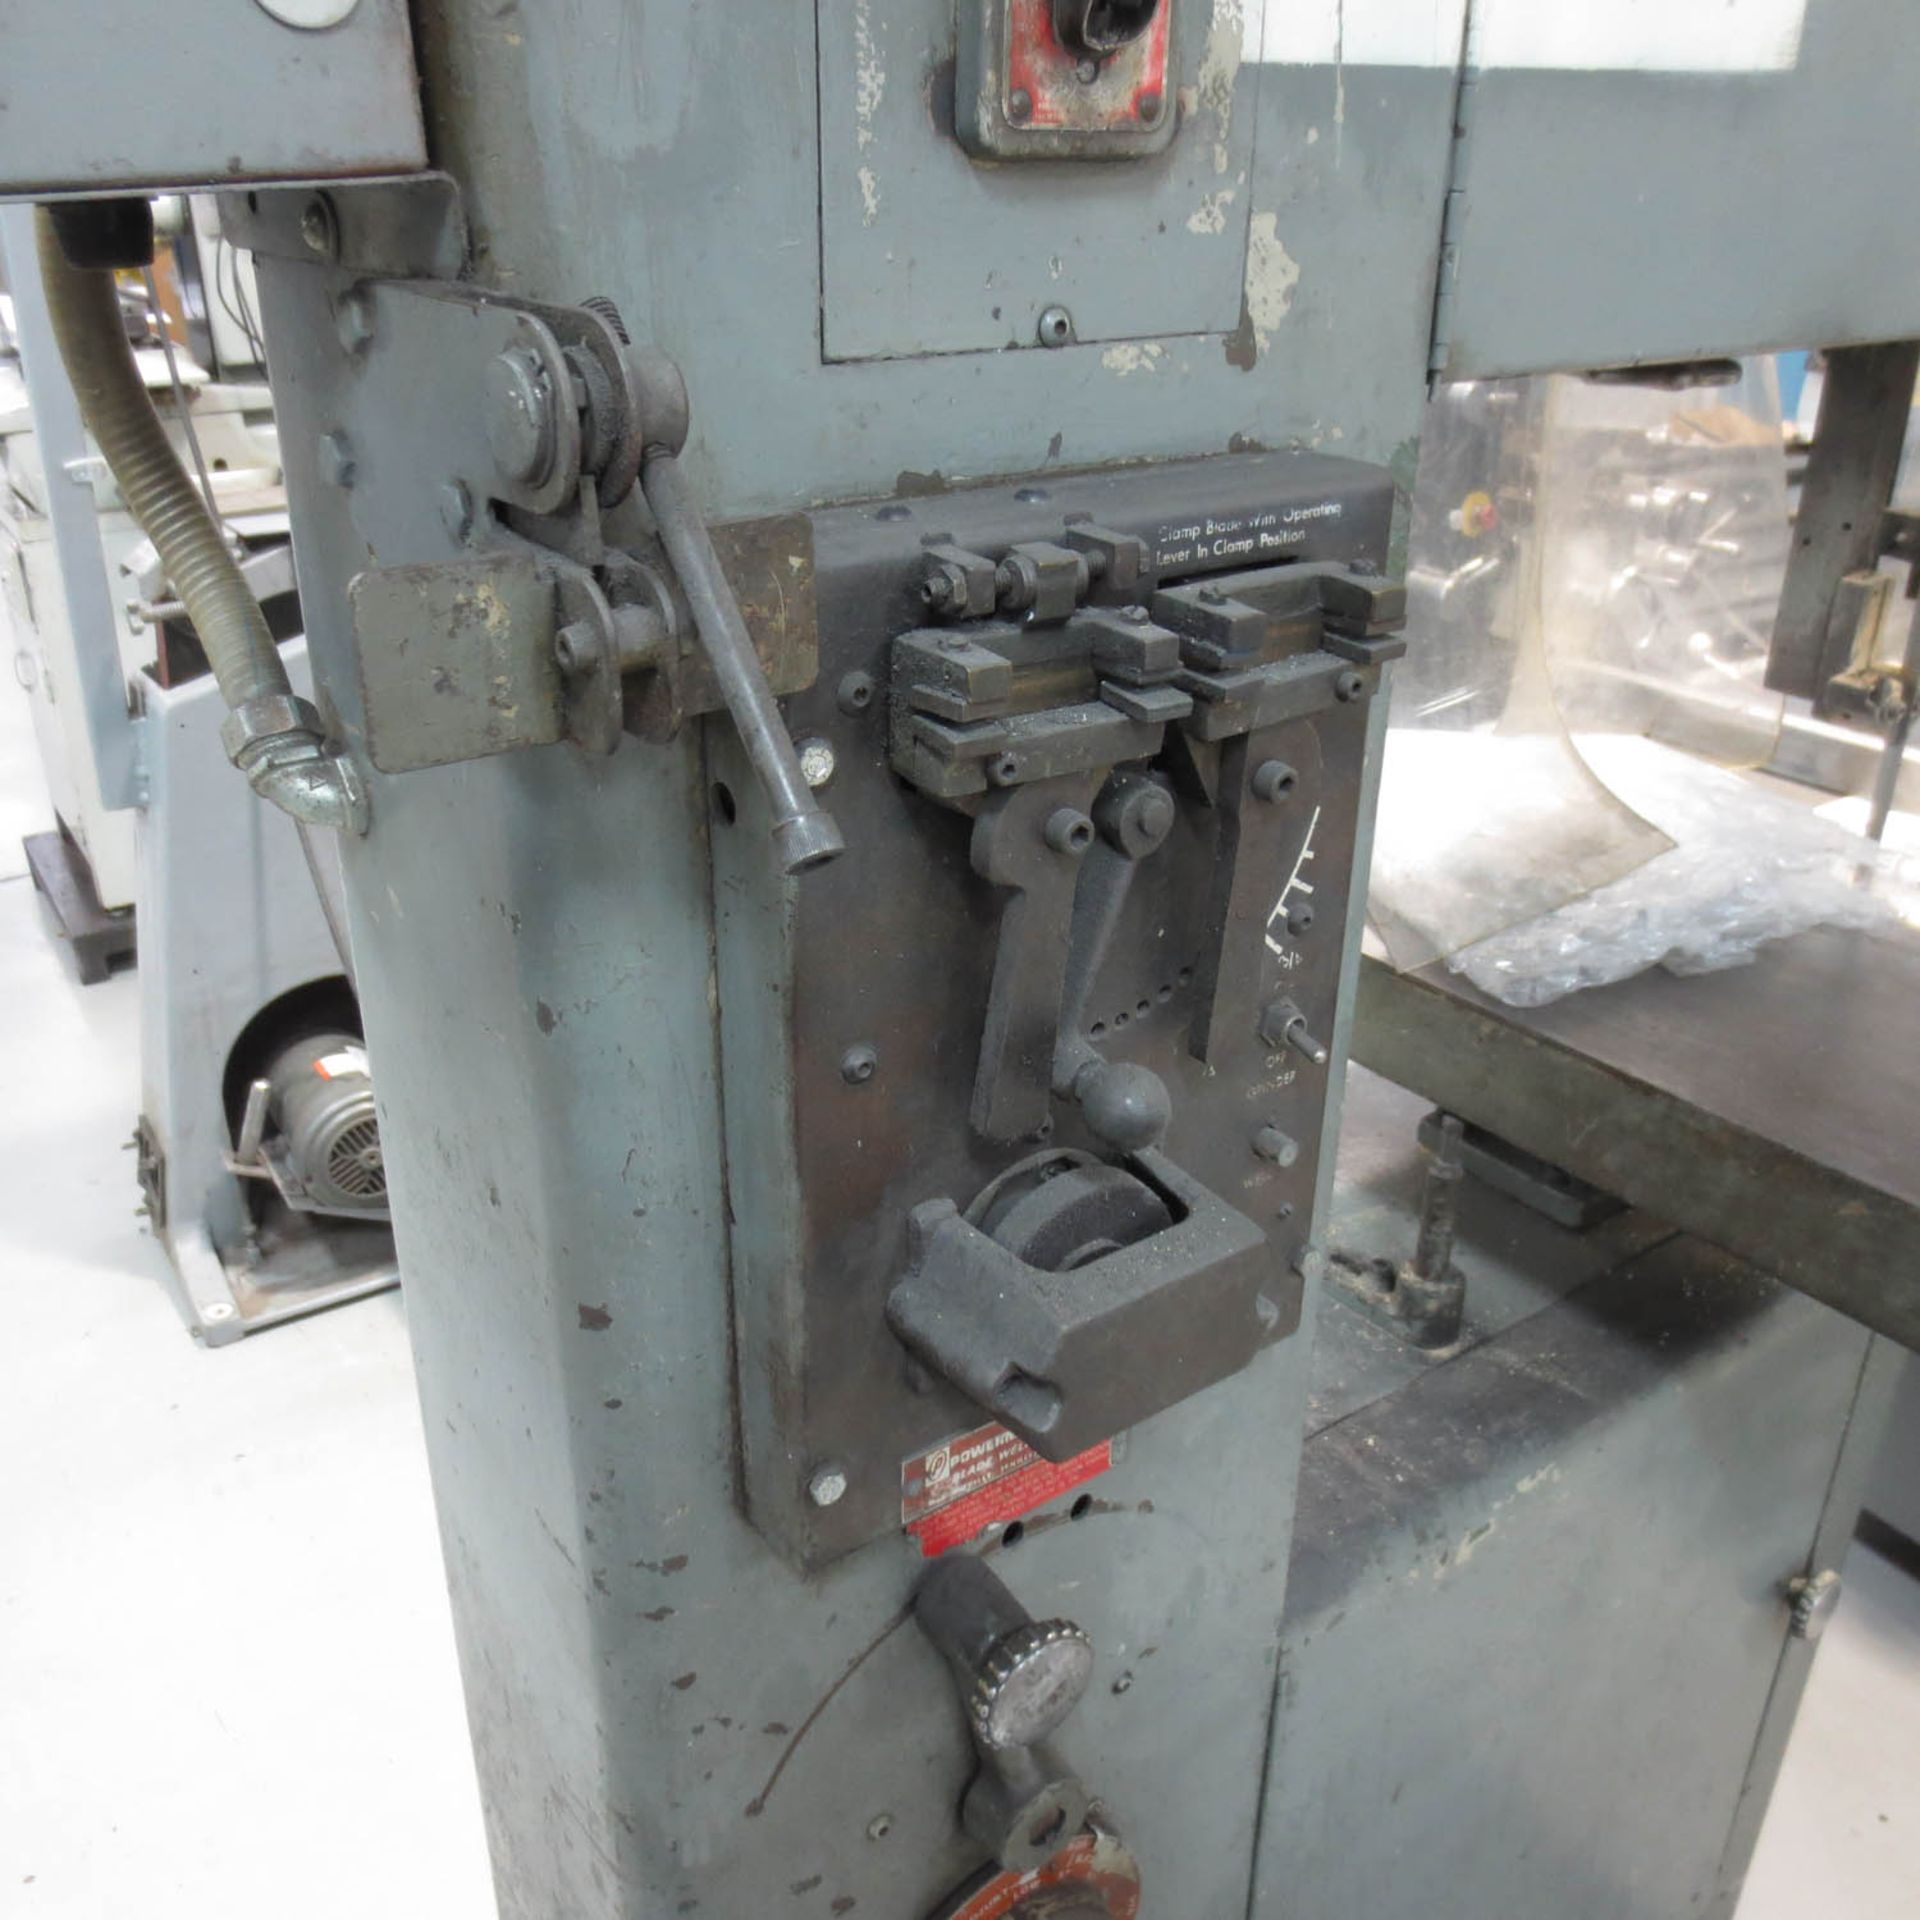 POWERMATIC MDL. 87 BAND SAW, 19-1/2'' THROAT, 24'' X 24'' TABLE WITH BLADE WELDER - Image 2 of 3